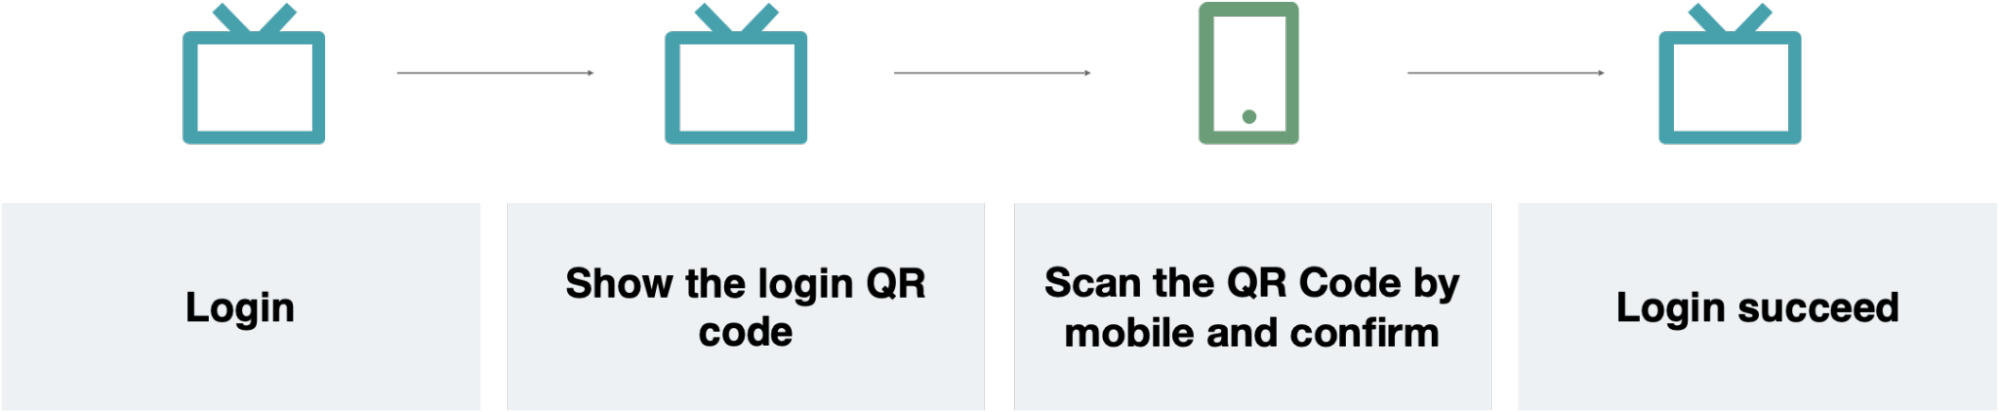 Diagram showing steps of logging in with a QR code